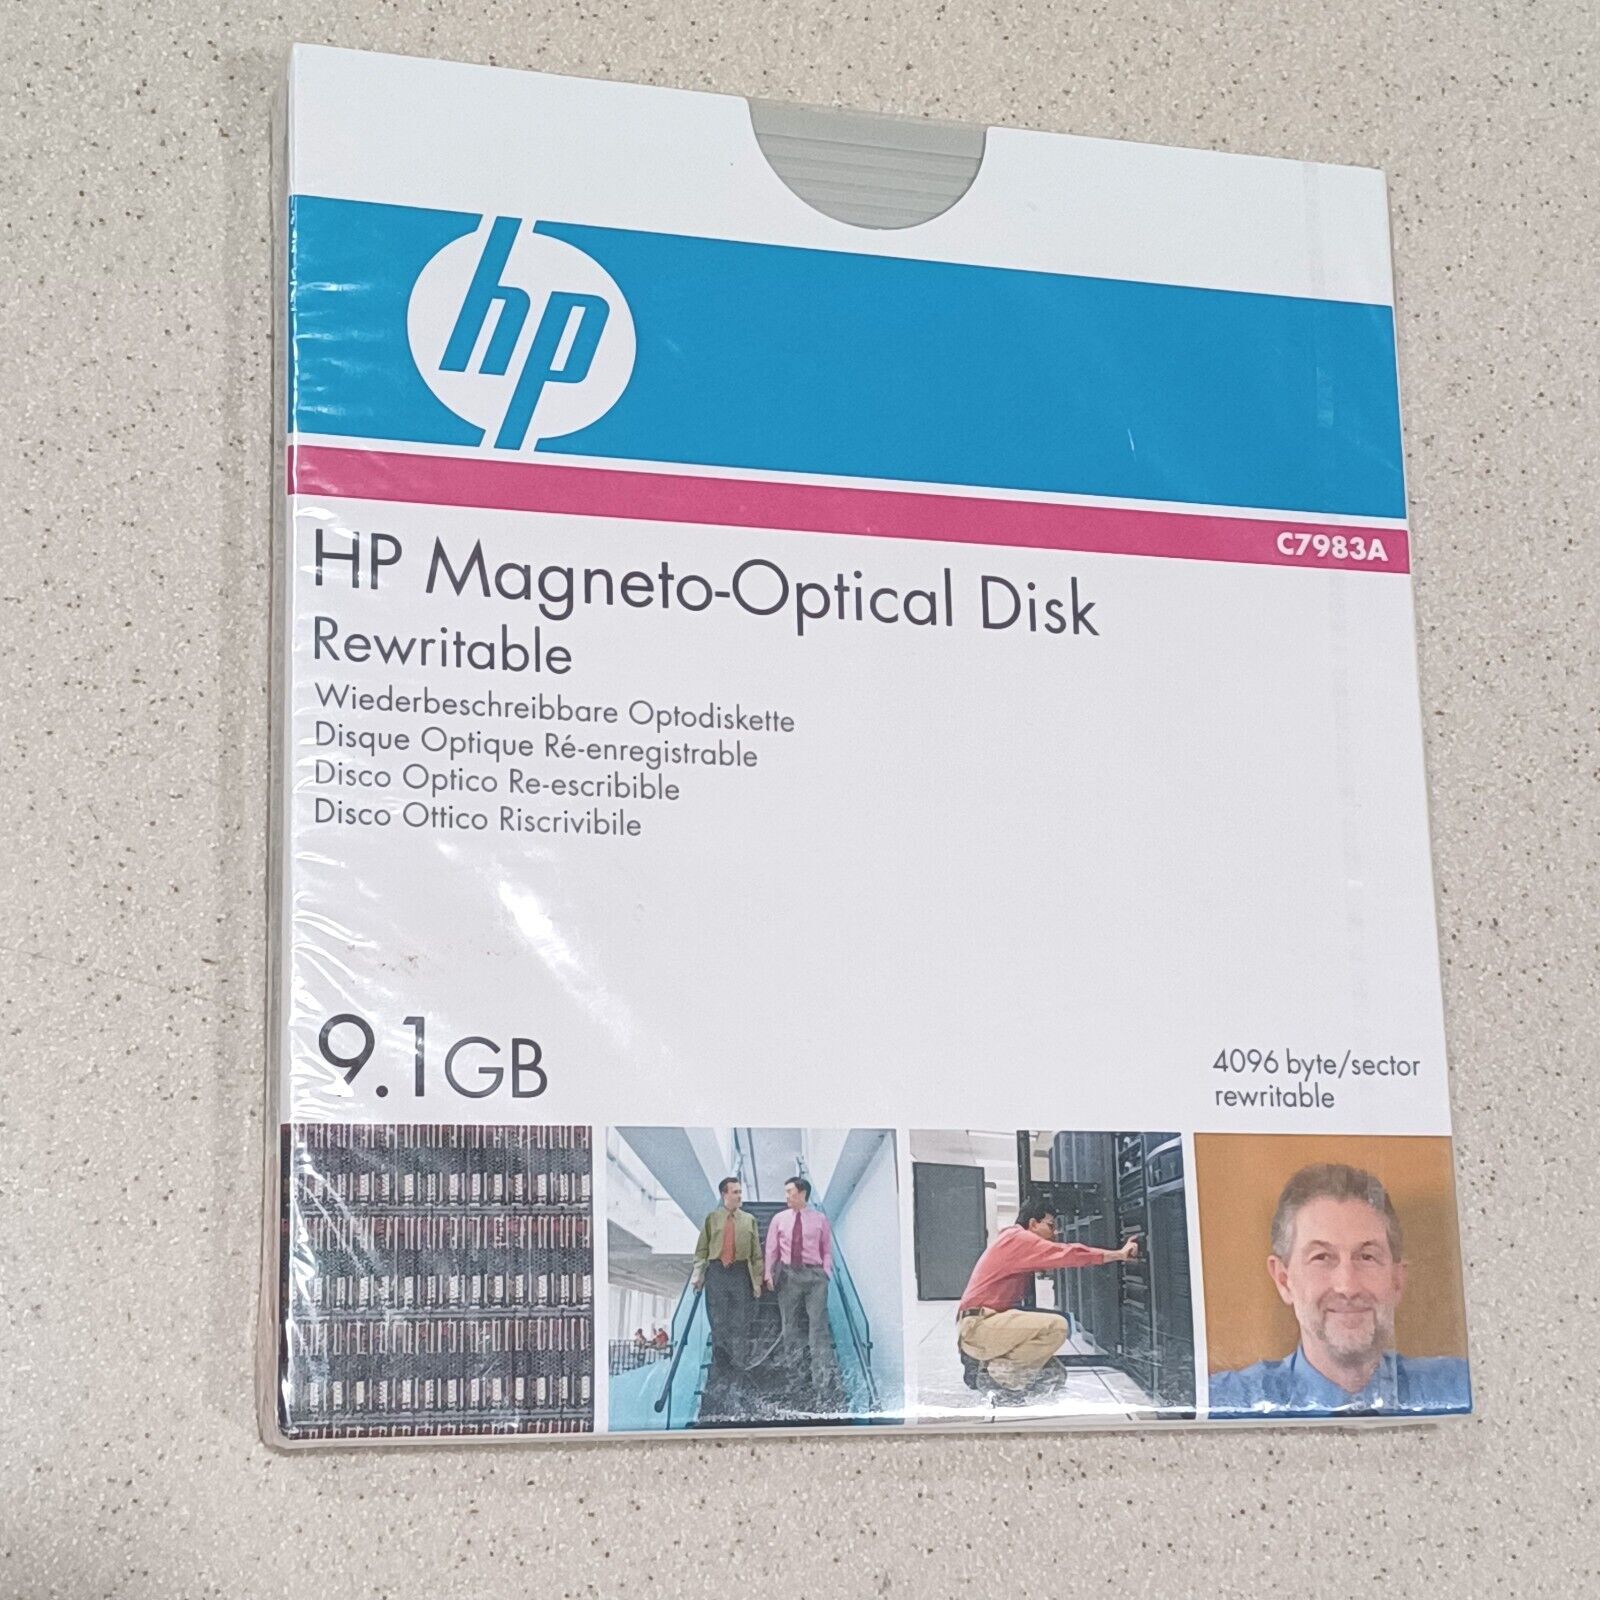 HP C7983A 9.1GB REWRITABLE MAGNETO OPTICAL DISK NEW SEALED